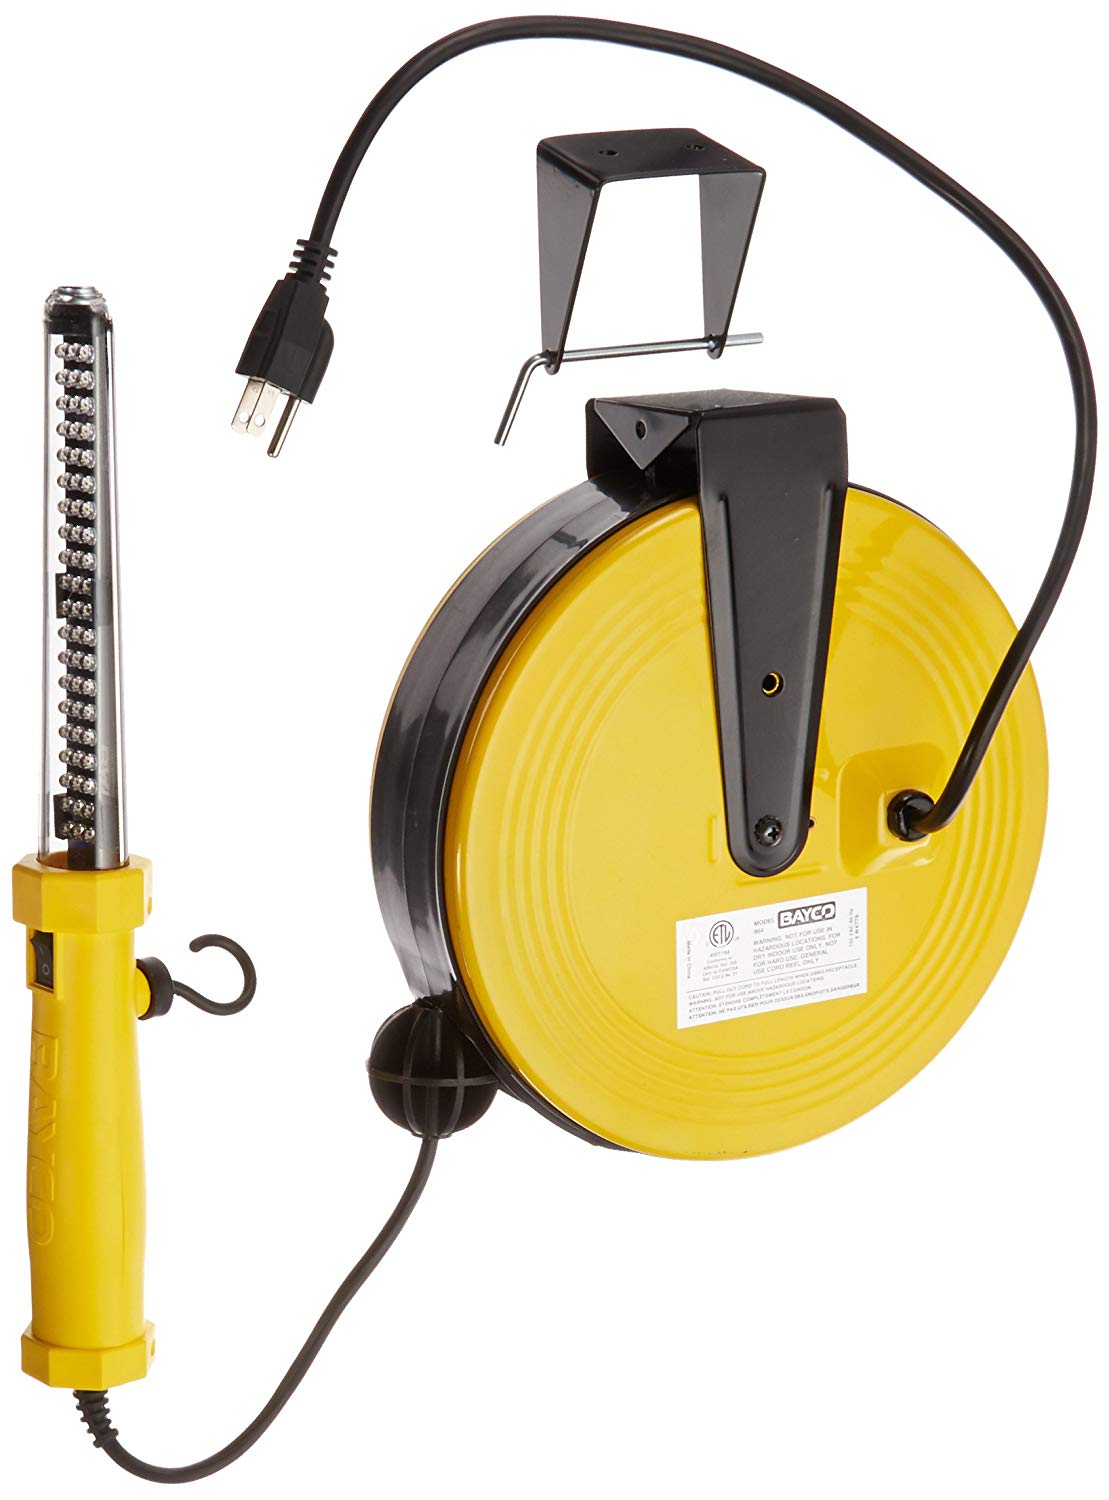 Bayco SL-864 60 LED Work Light on Metal Reel with 50-Foot Cord - MPR Tools & Equipment